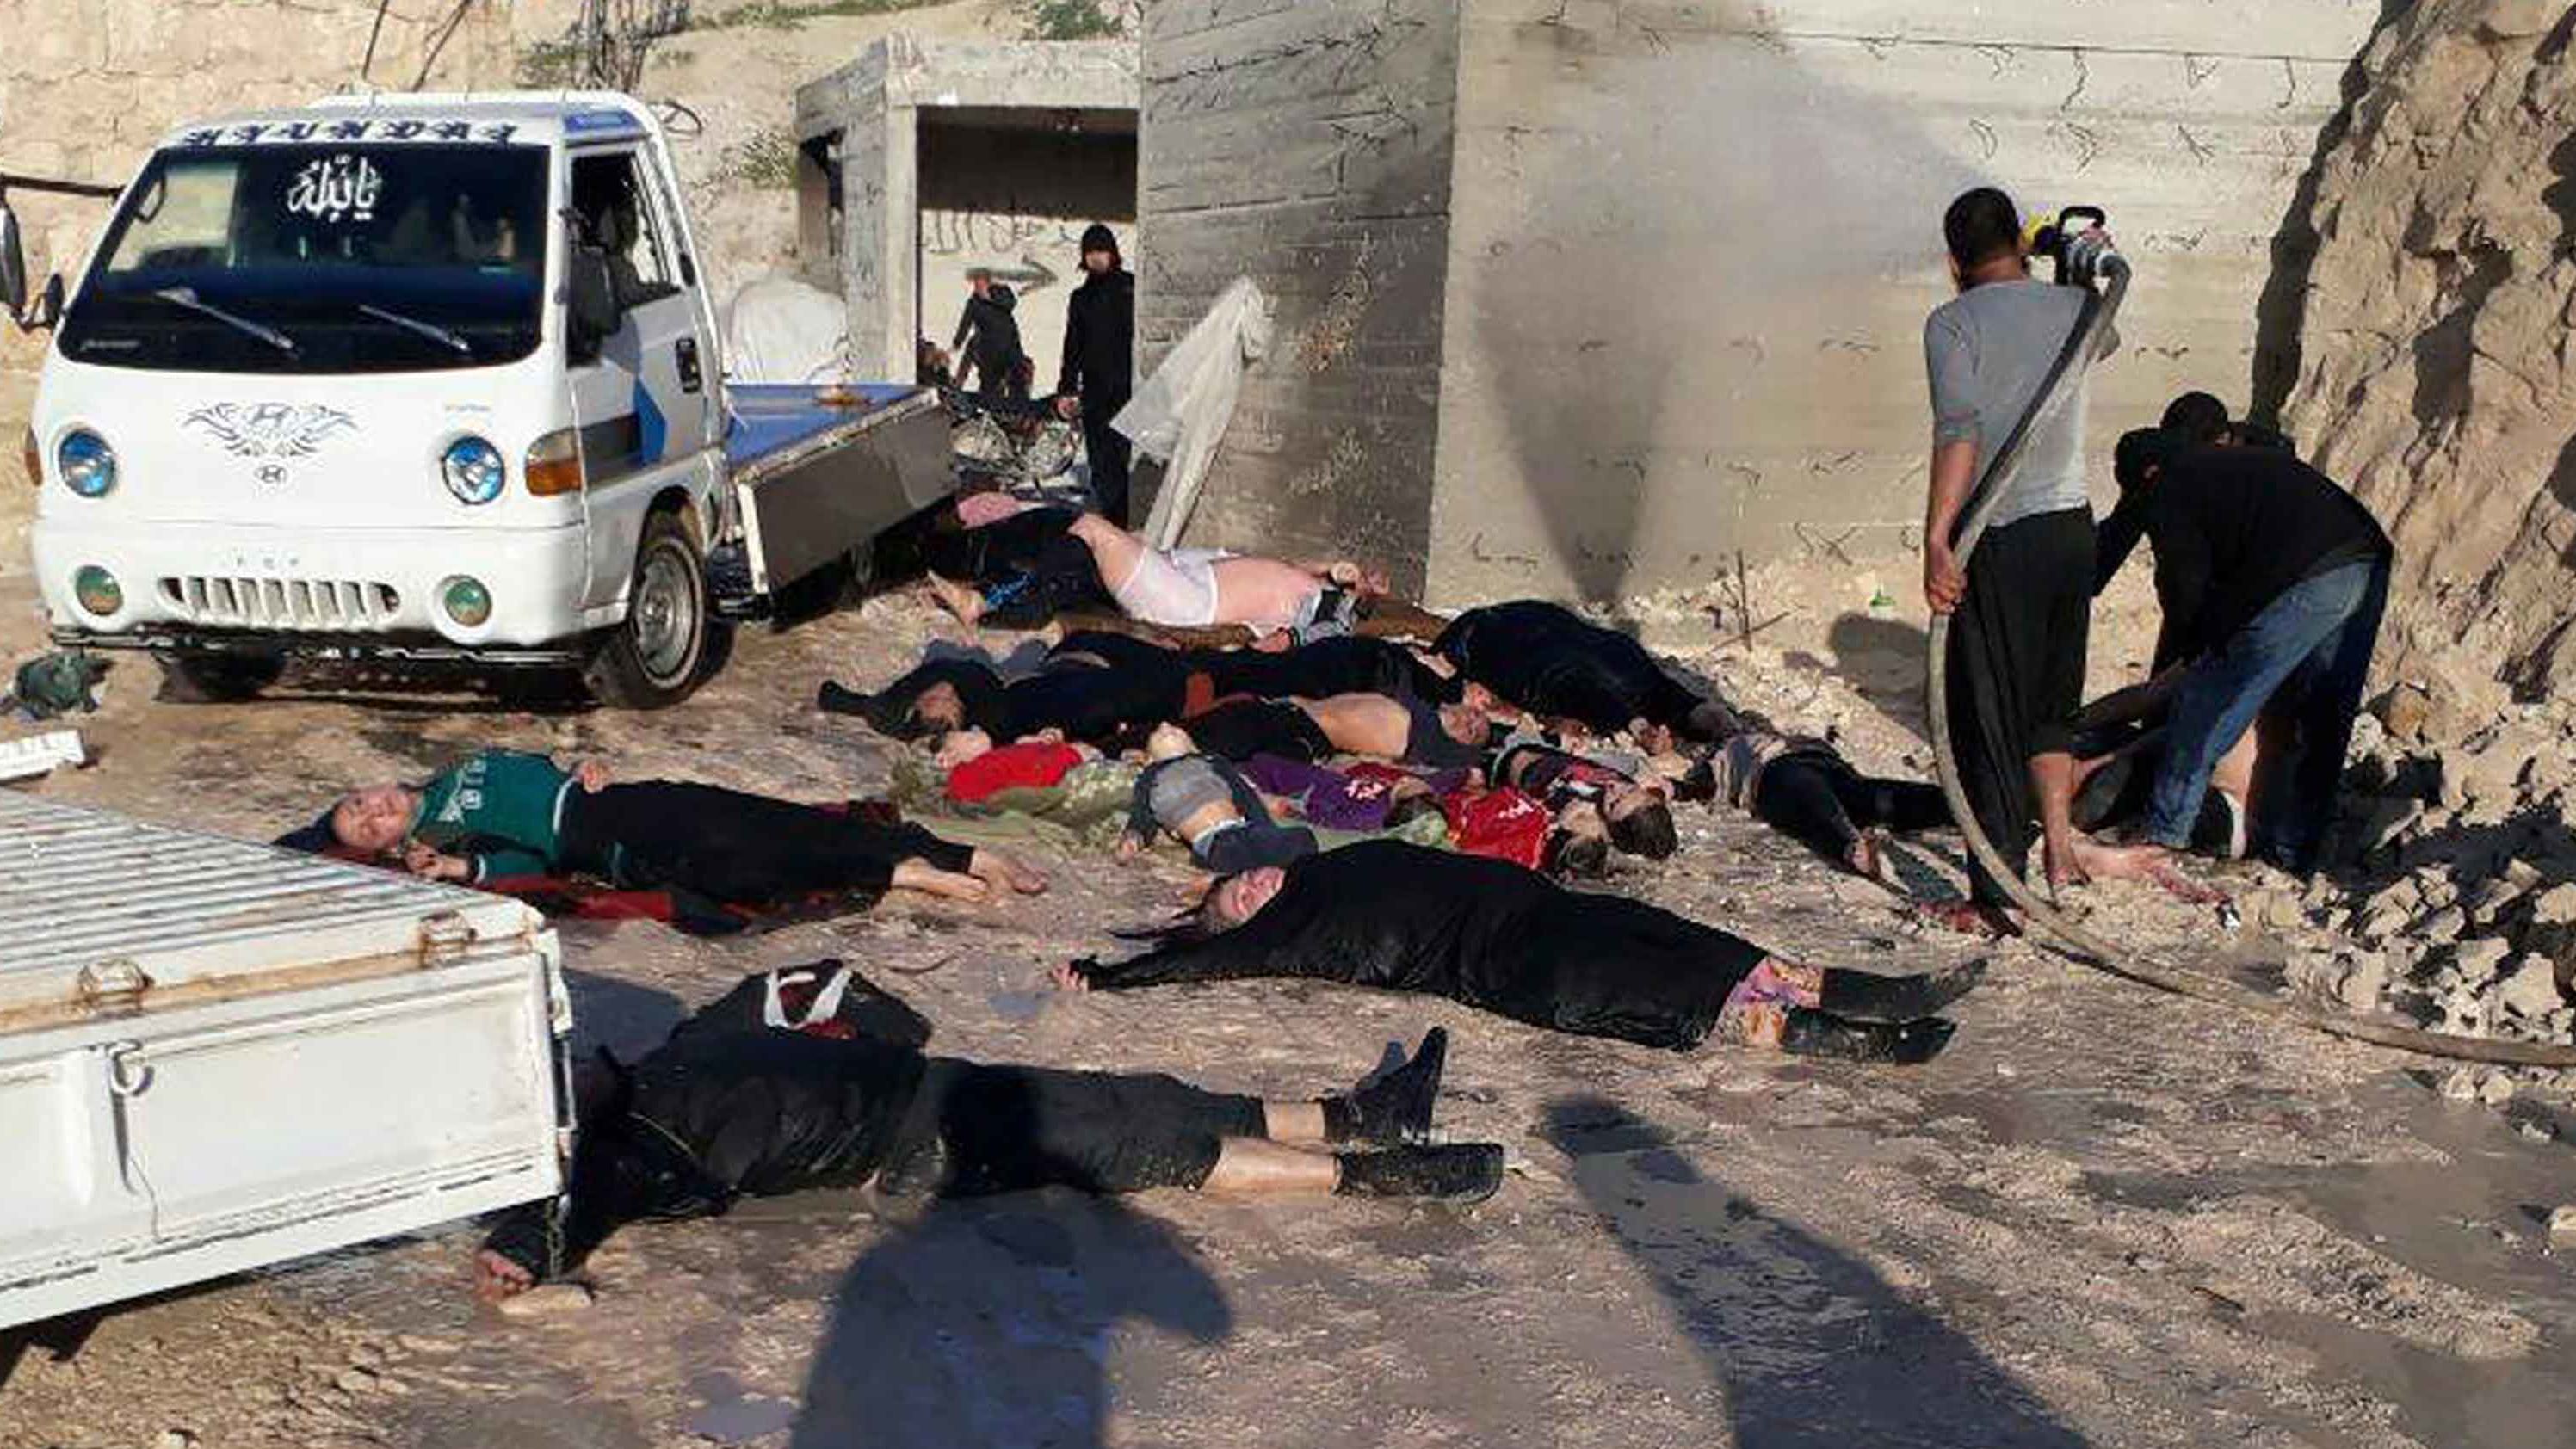 Victims of a suspected chemical attack are seen in Khan Sheikhoun on Tuesday, April 4.